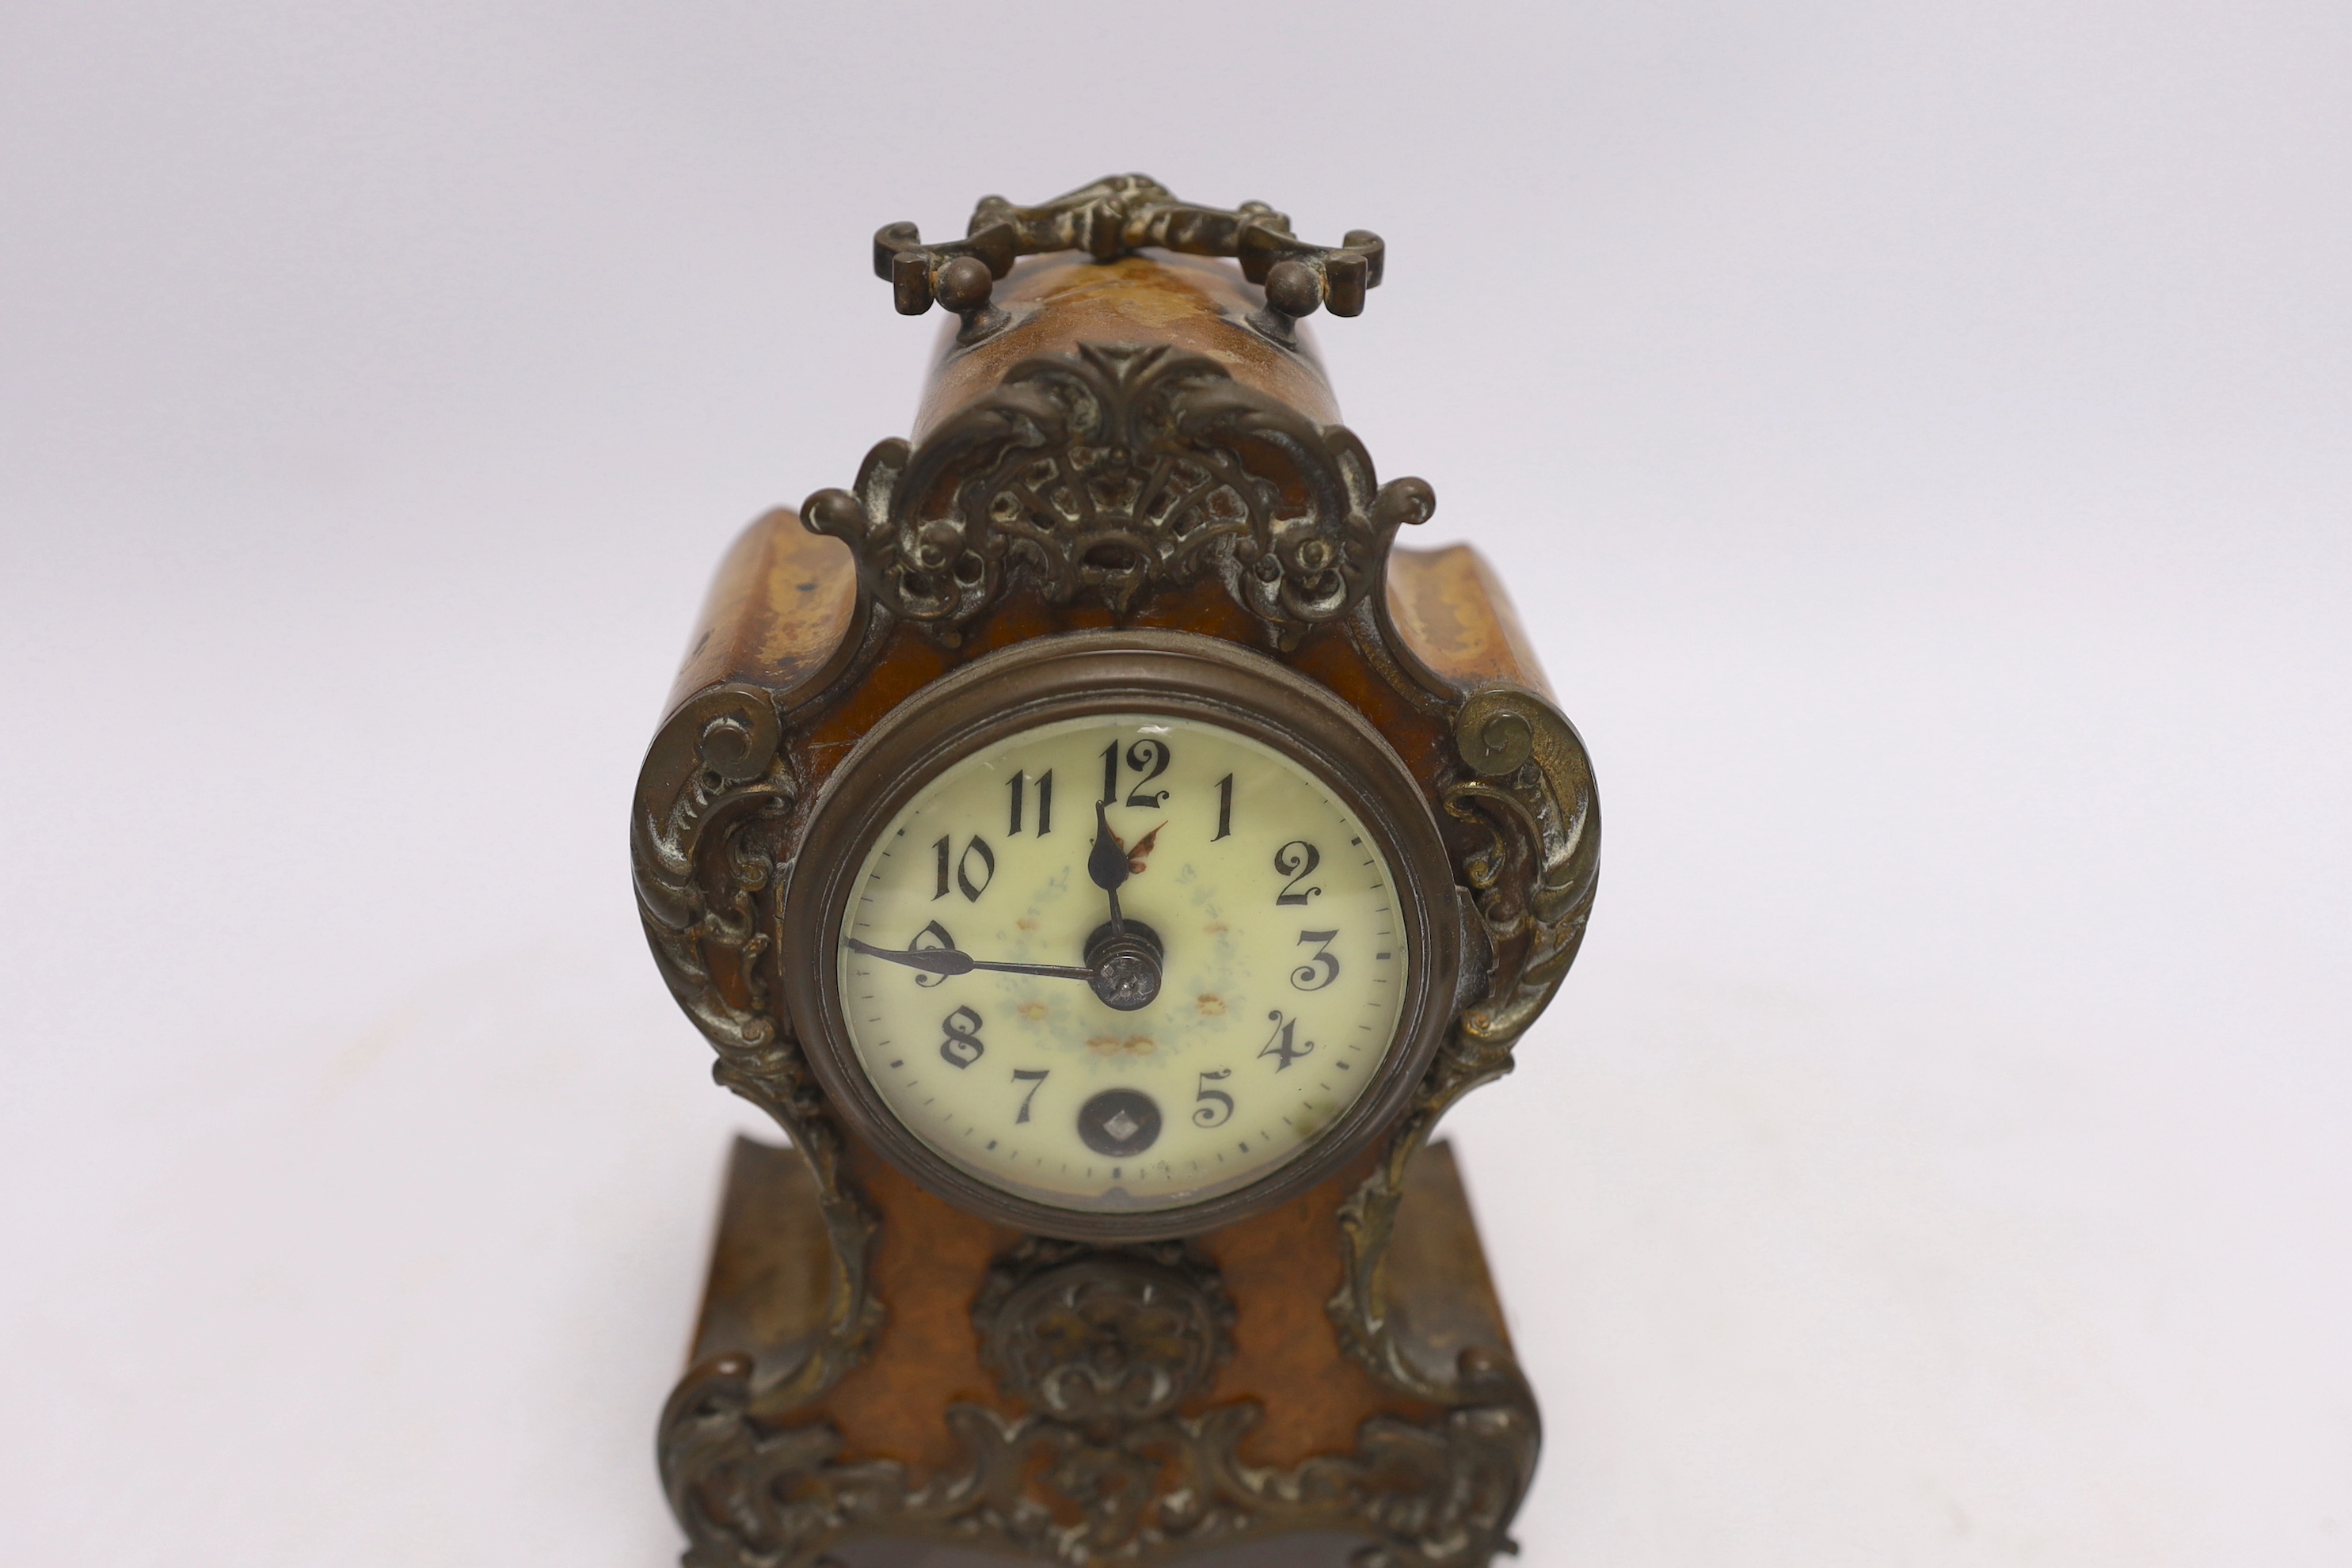 A small brass mounted mantel timepiece, German movement, with key, 18cm